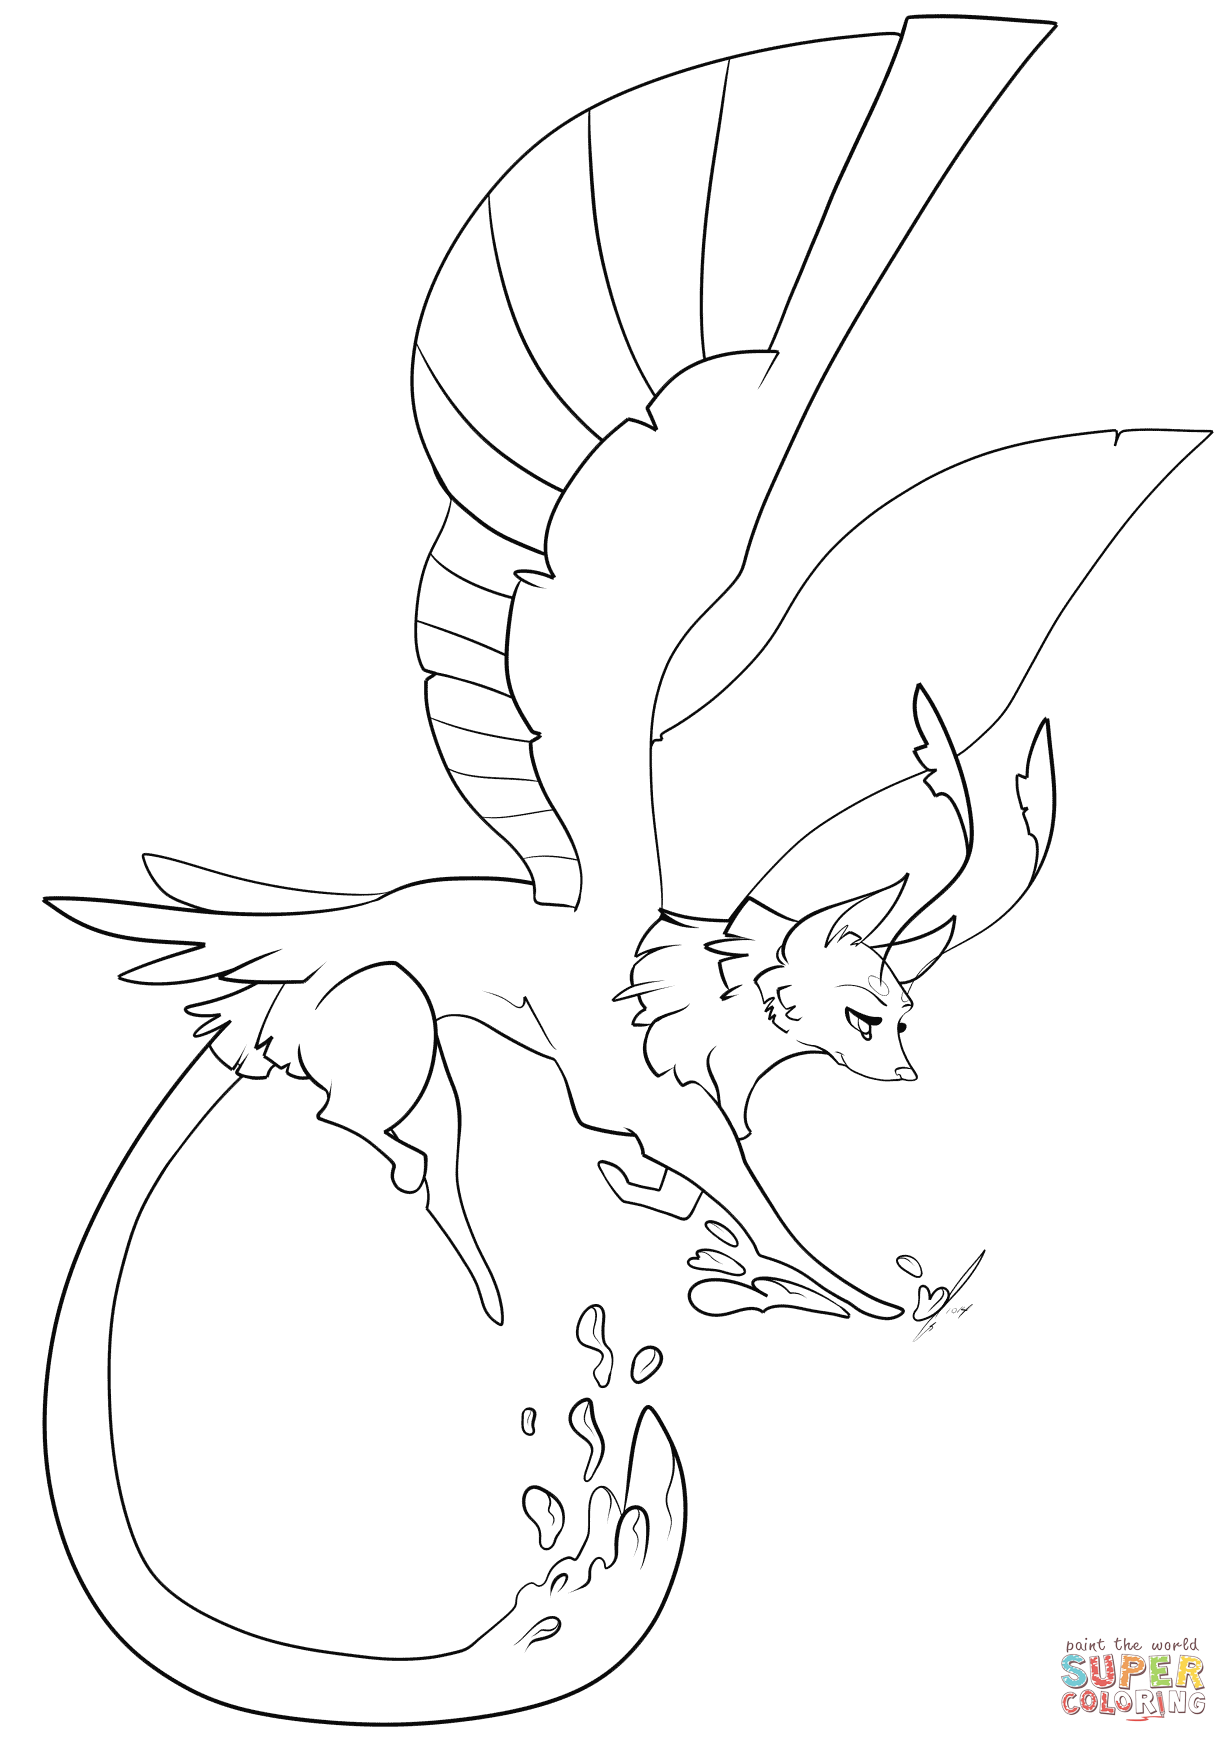 Feathered fantasy wolf coloring page free printable coloring pages